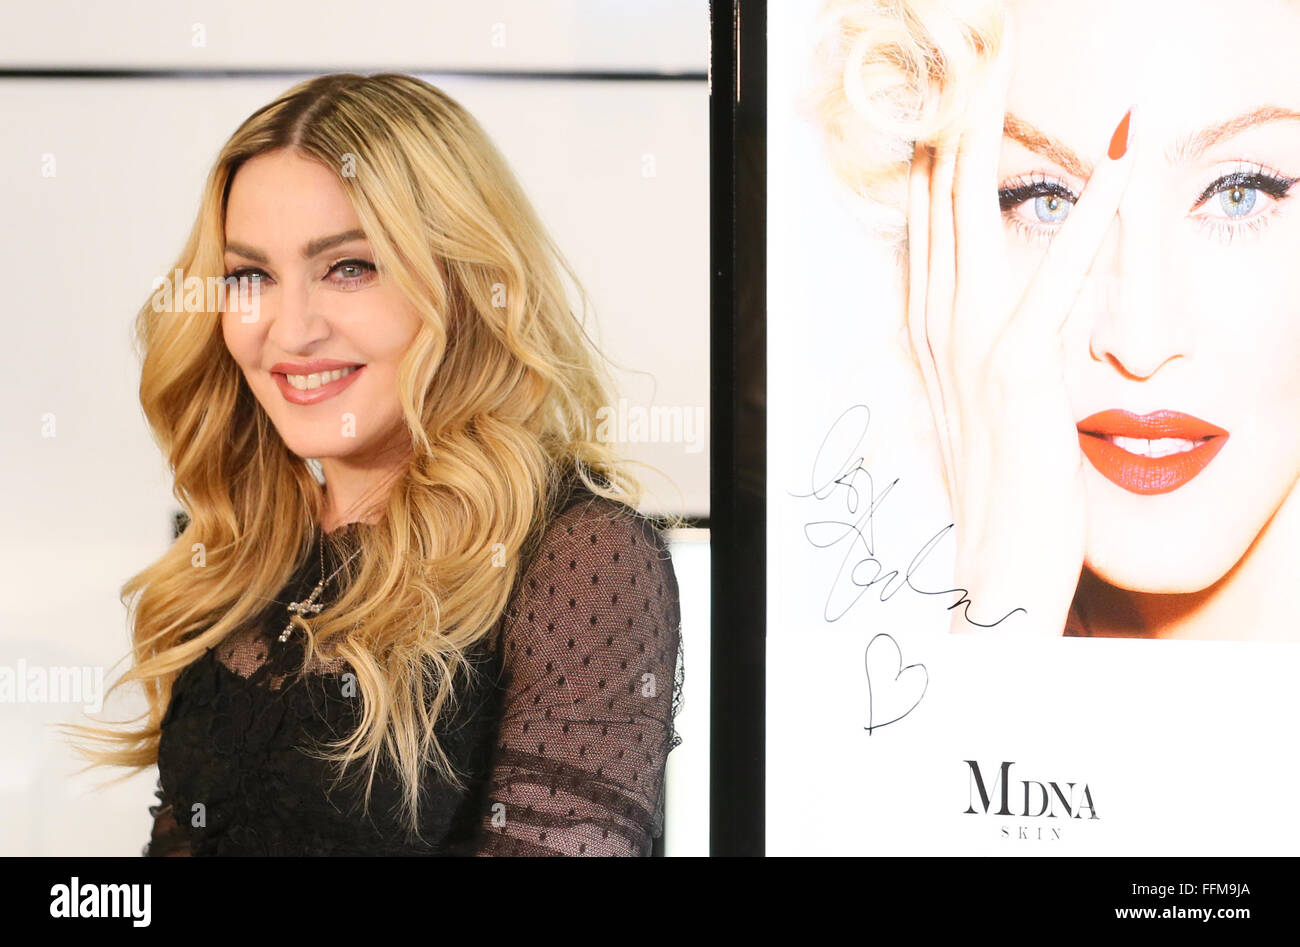 Madonna appears at Mitsukoshi Department store in Ginza to promote her cosmetic line MDNA Skin, on February 15, 2016 in Tokyo, Japan. The 57 year-old singer performed two consecutive nights at Saitama Super Arena over the weekend. Saturday's show started two hours late however, forcing some fans who had travelled from distance to leave even before the show began in order to catch the last train home. © Yohei Osada/AFLO/Alamy Live News Stock Photo